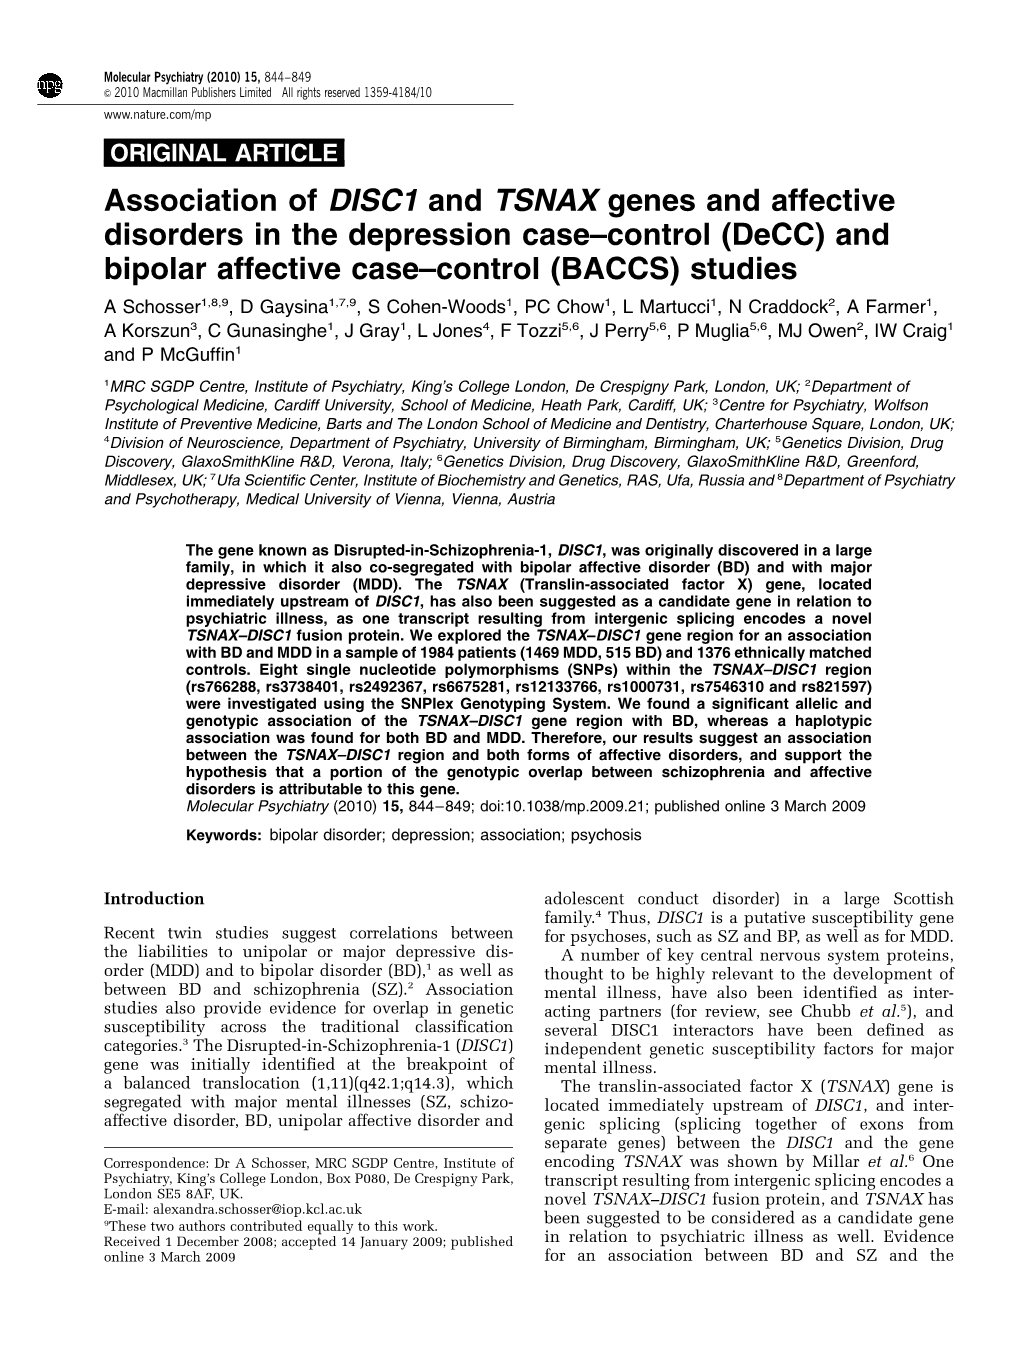 Association of DISC1 and TSNAX Genes and Affective Disorders in the Depression Case&Ndash